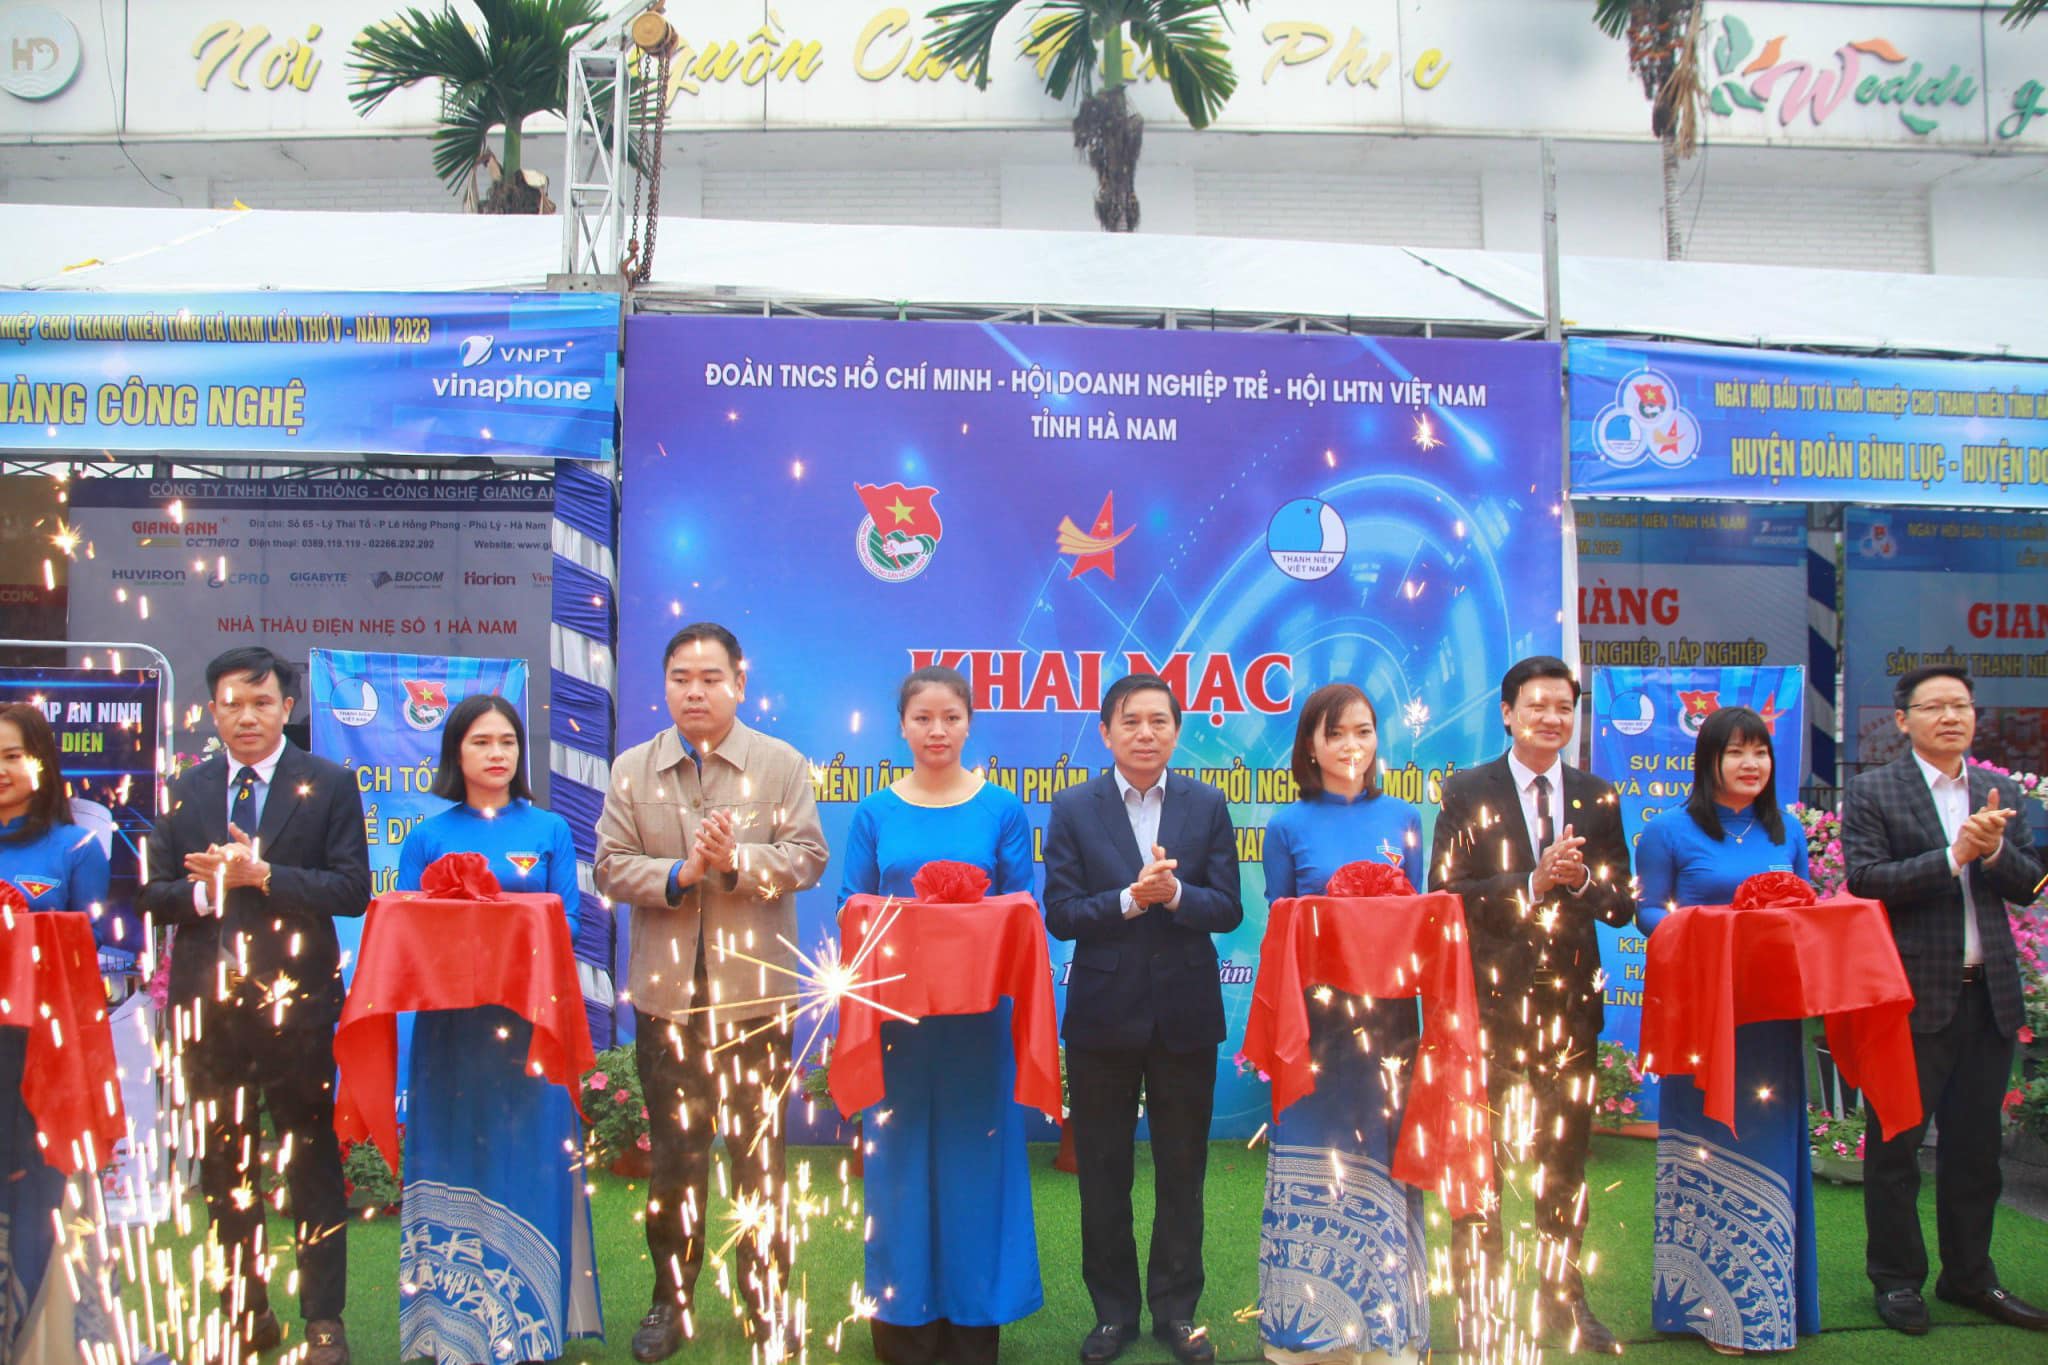 VNPT accompanies start-ups of young people in Ha Nam province